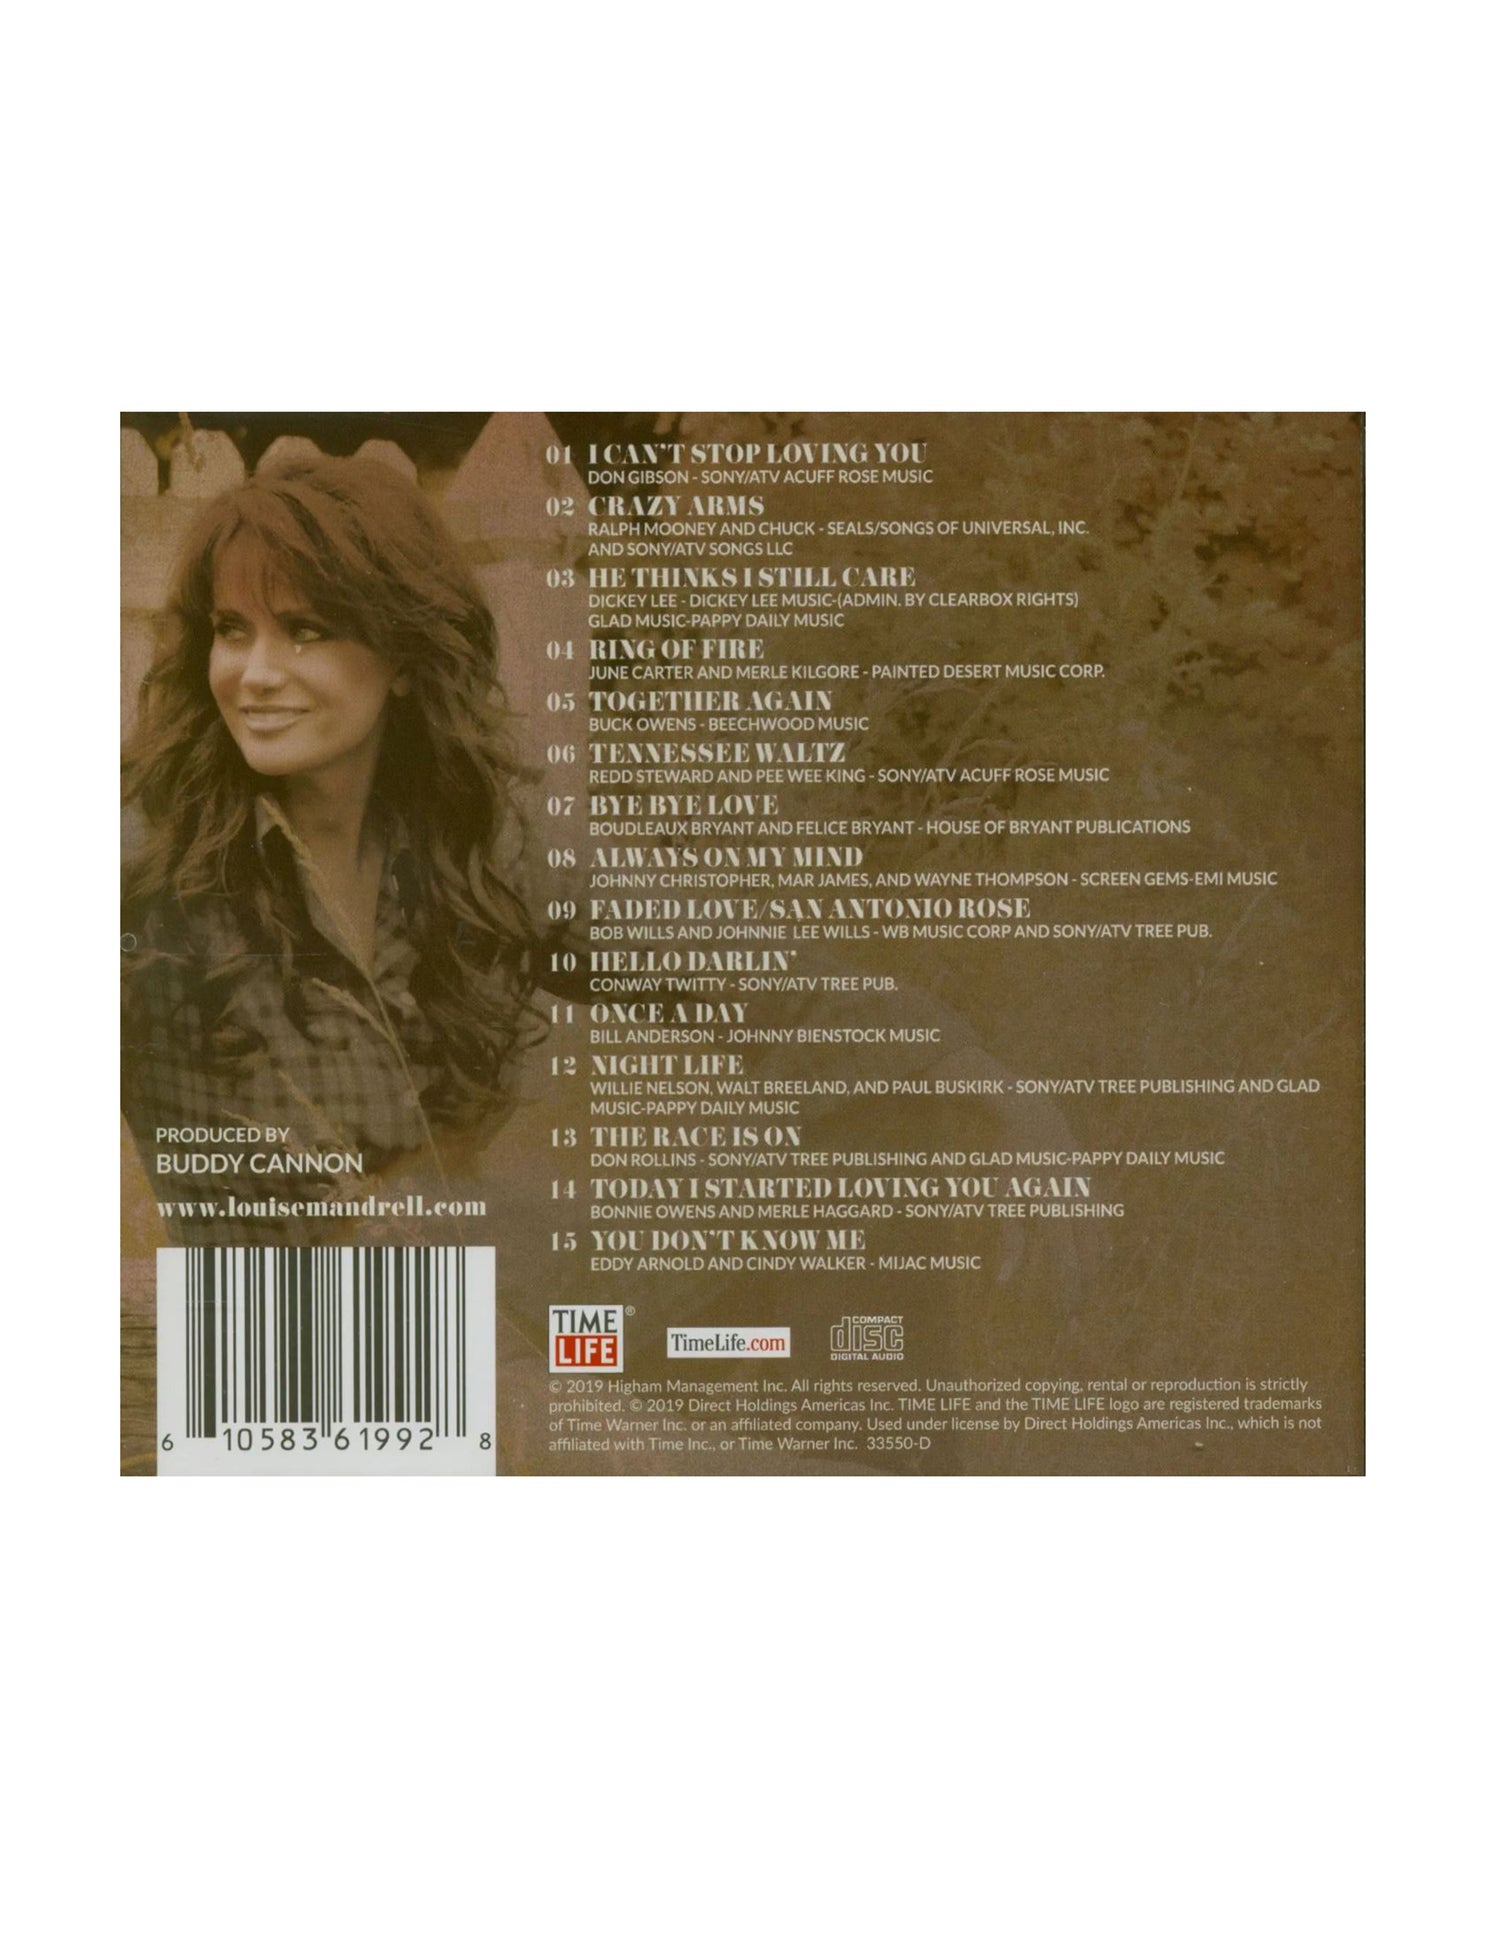 Autographed Louise Mandrell: Playing Favorites (CD)